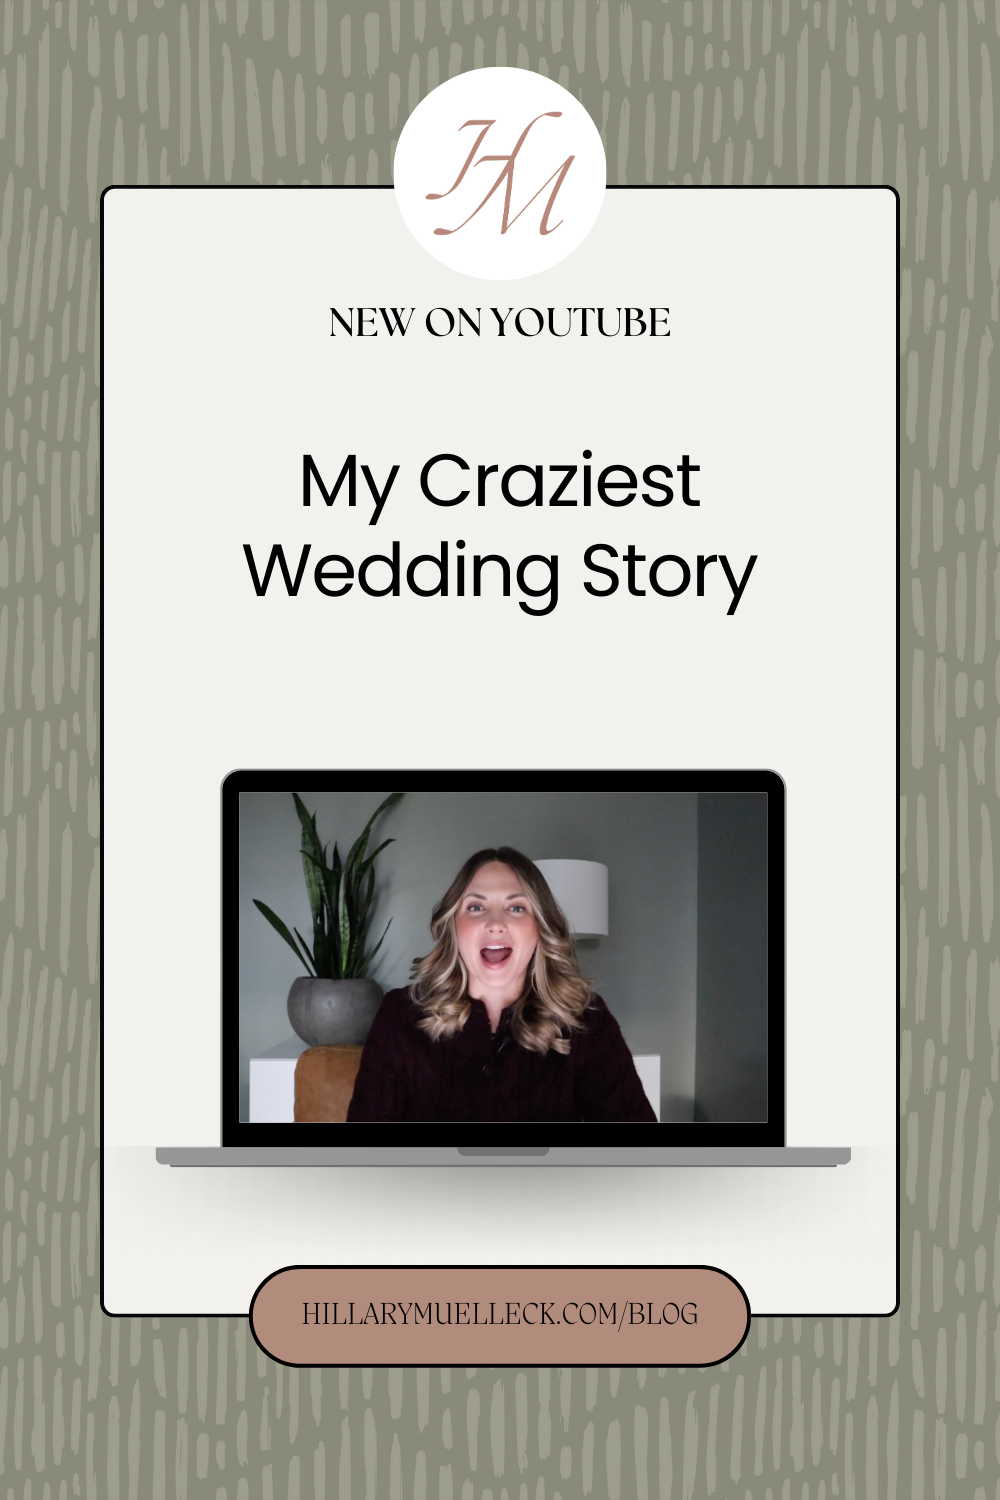 My Crazy Wedding Story as a Wedding Photographer: Hillary Muelleck shares the craziest thing she's seen as a photographer of 10 years